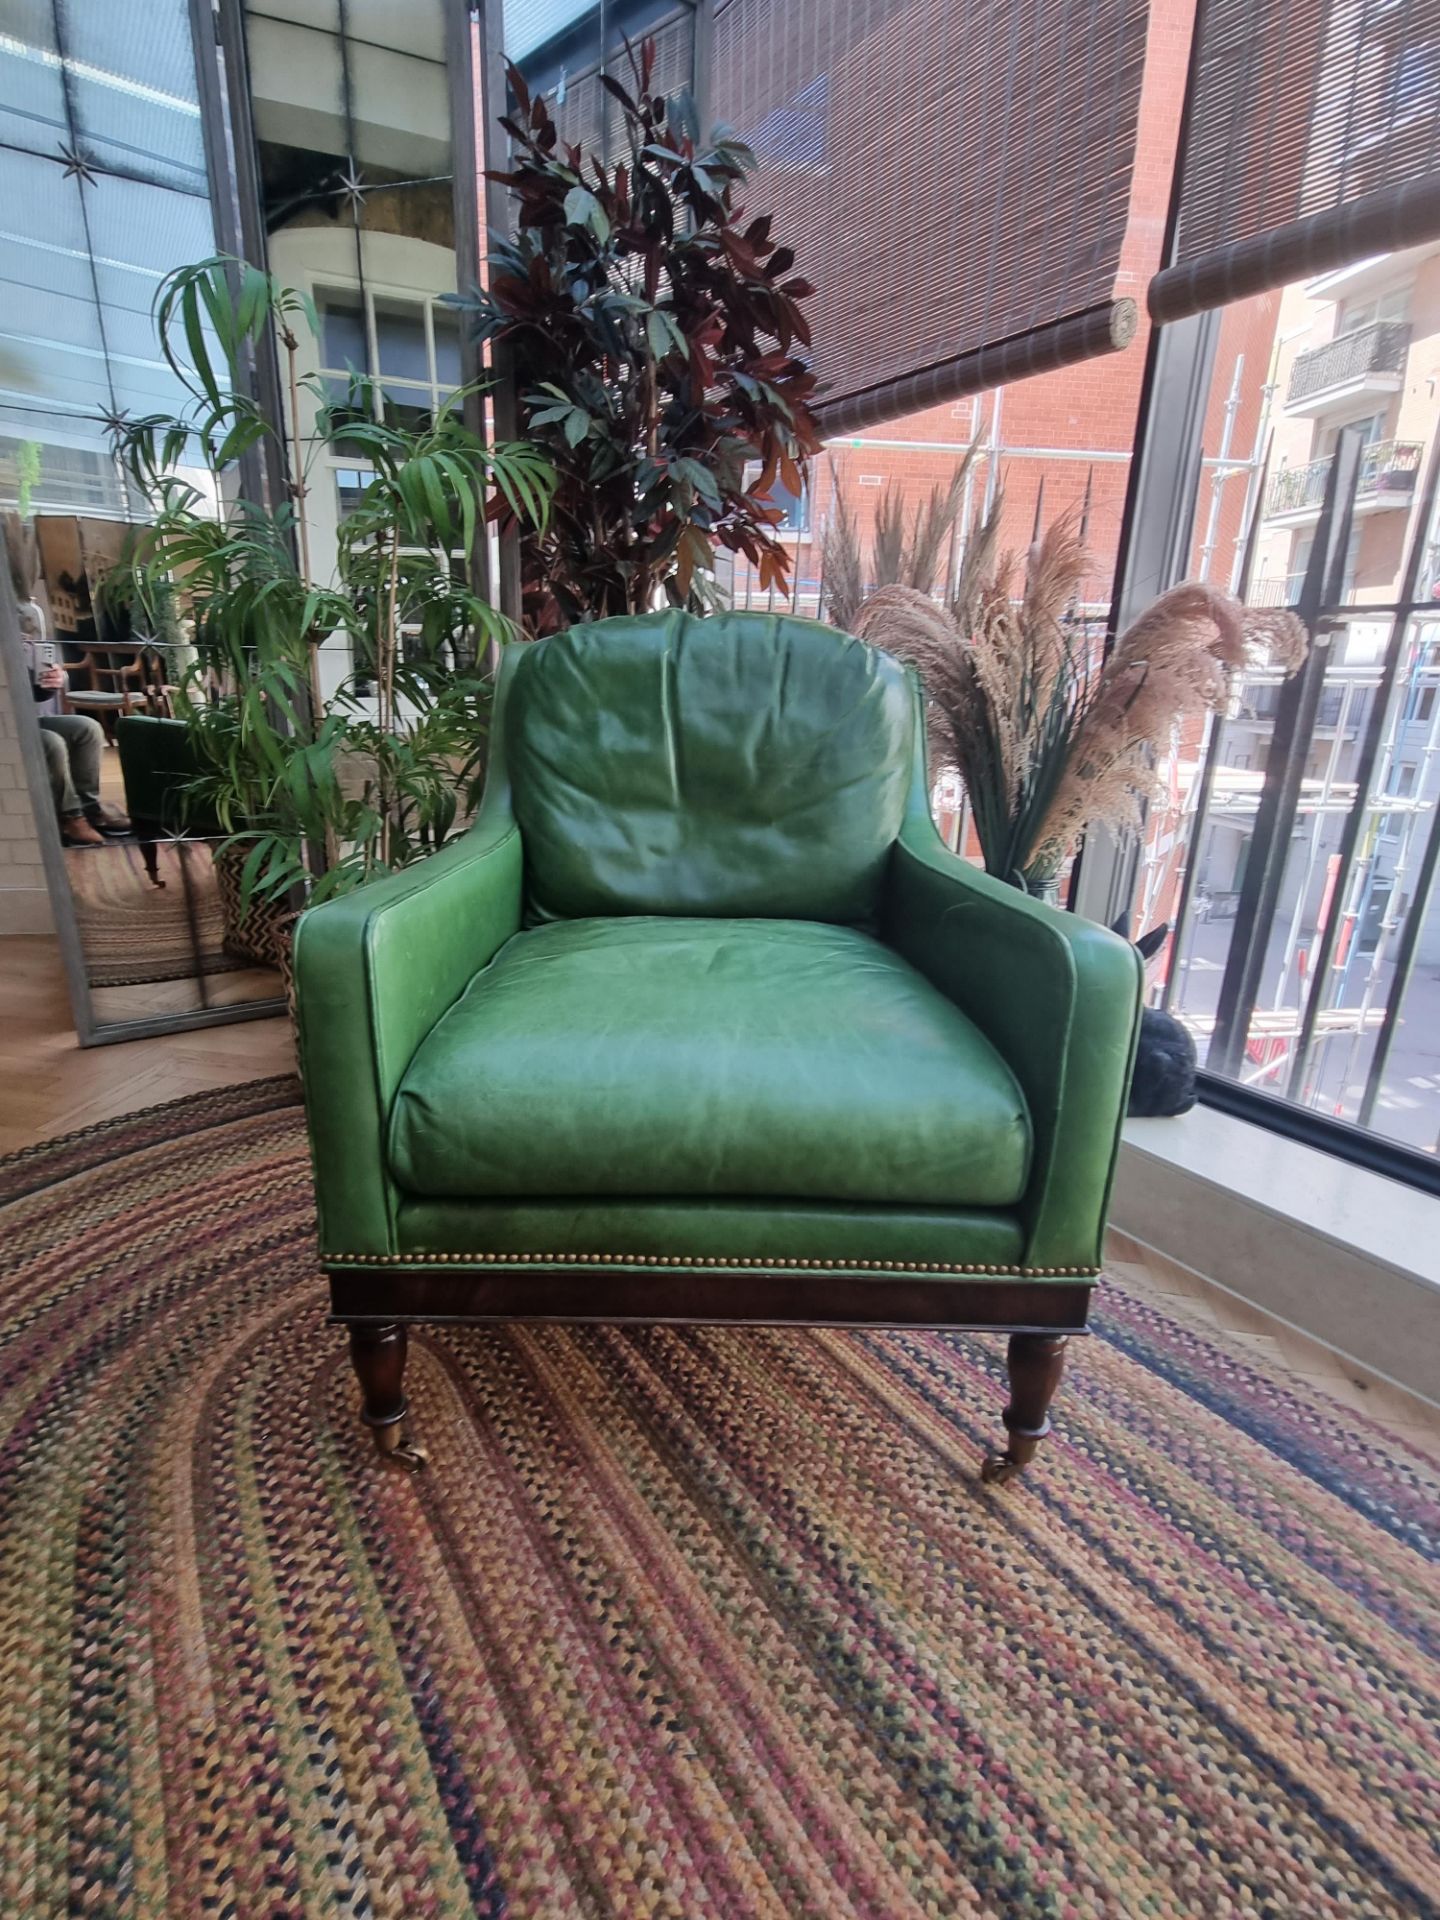 A  Green Leather upholstered vintage armchair on castor front legs reupholstered in a racing green